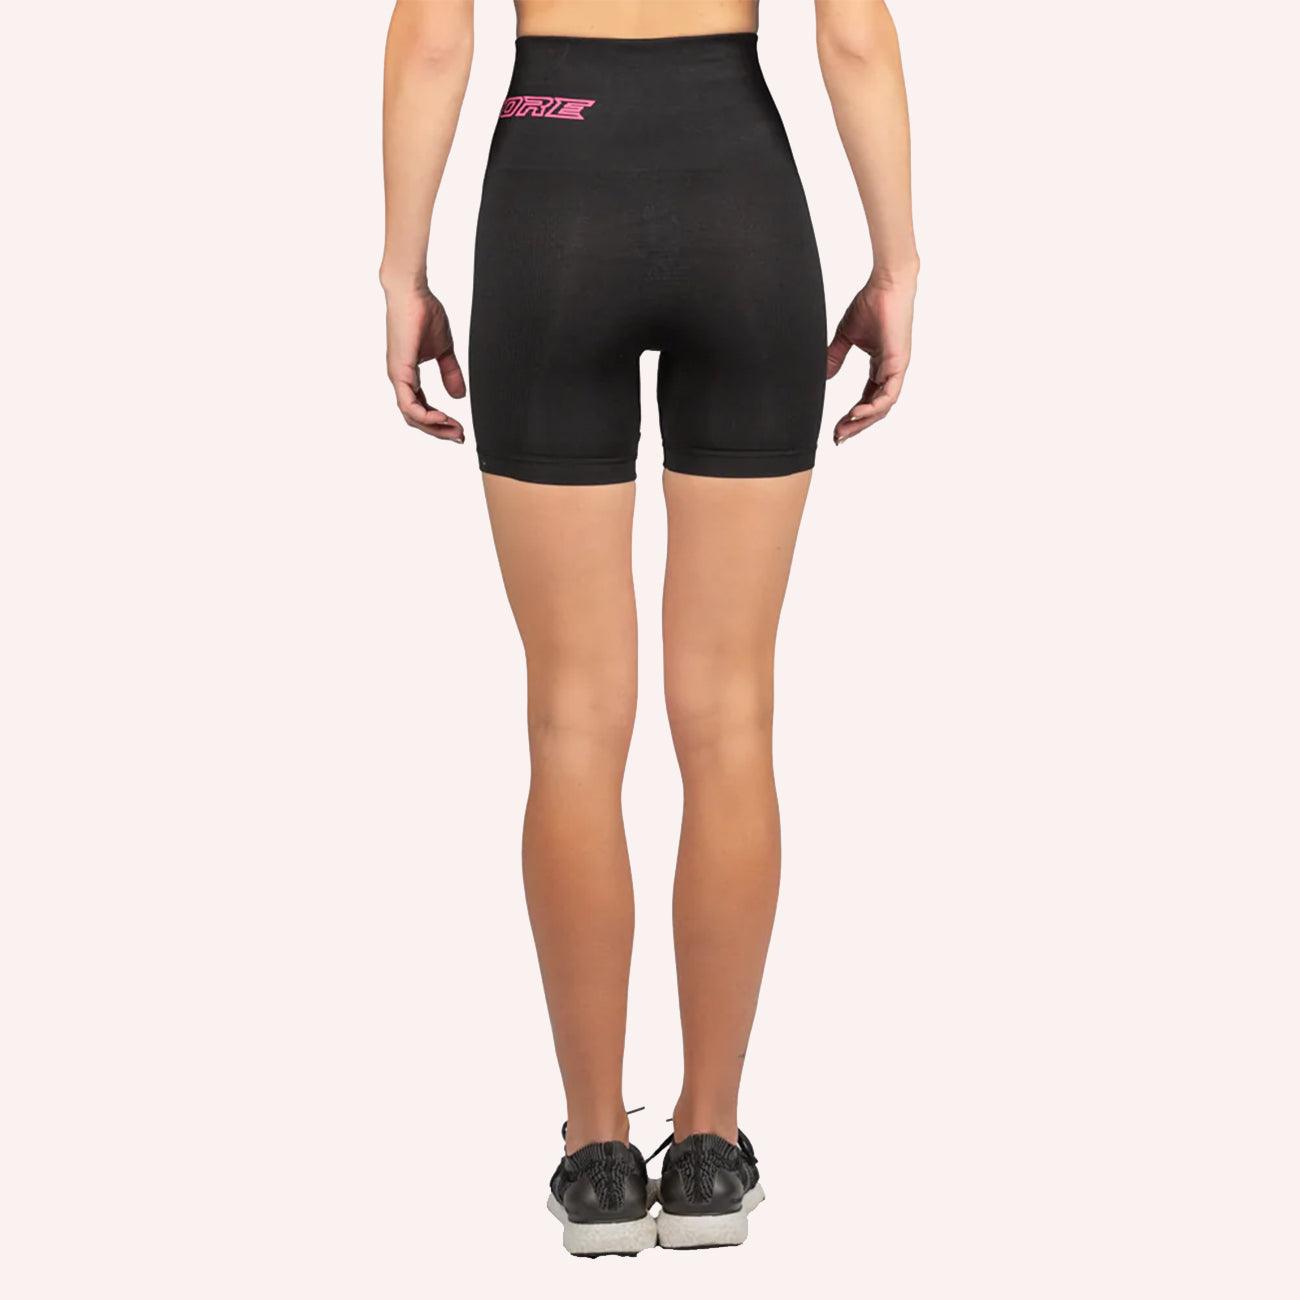 Patented Mary Coretech Injury Recovery and Postpartum Compression Shorts - Black